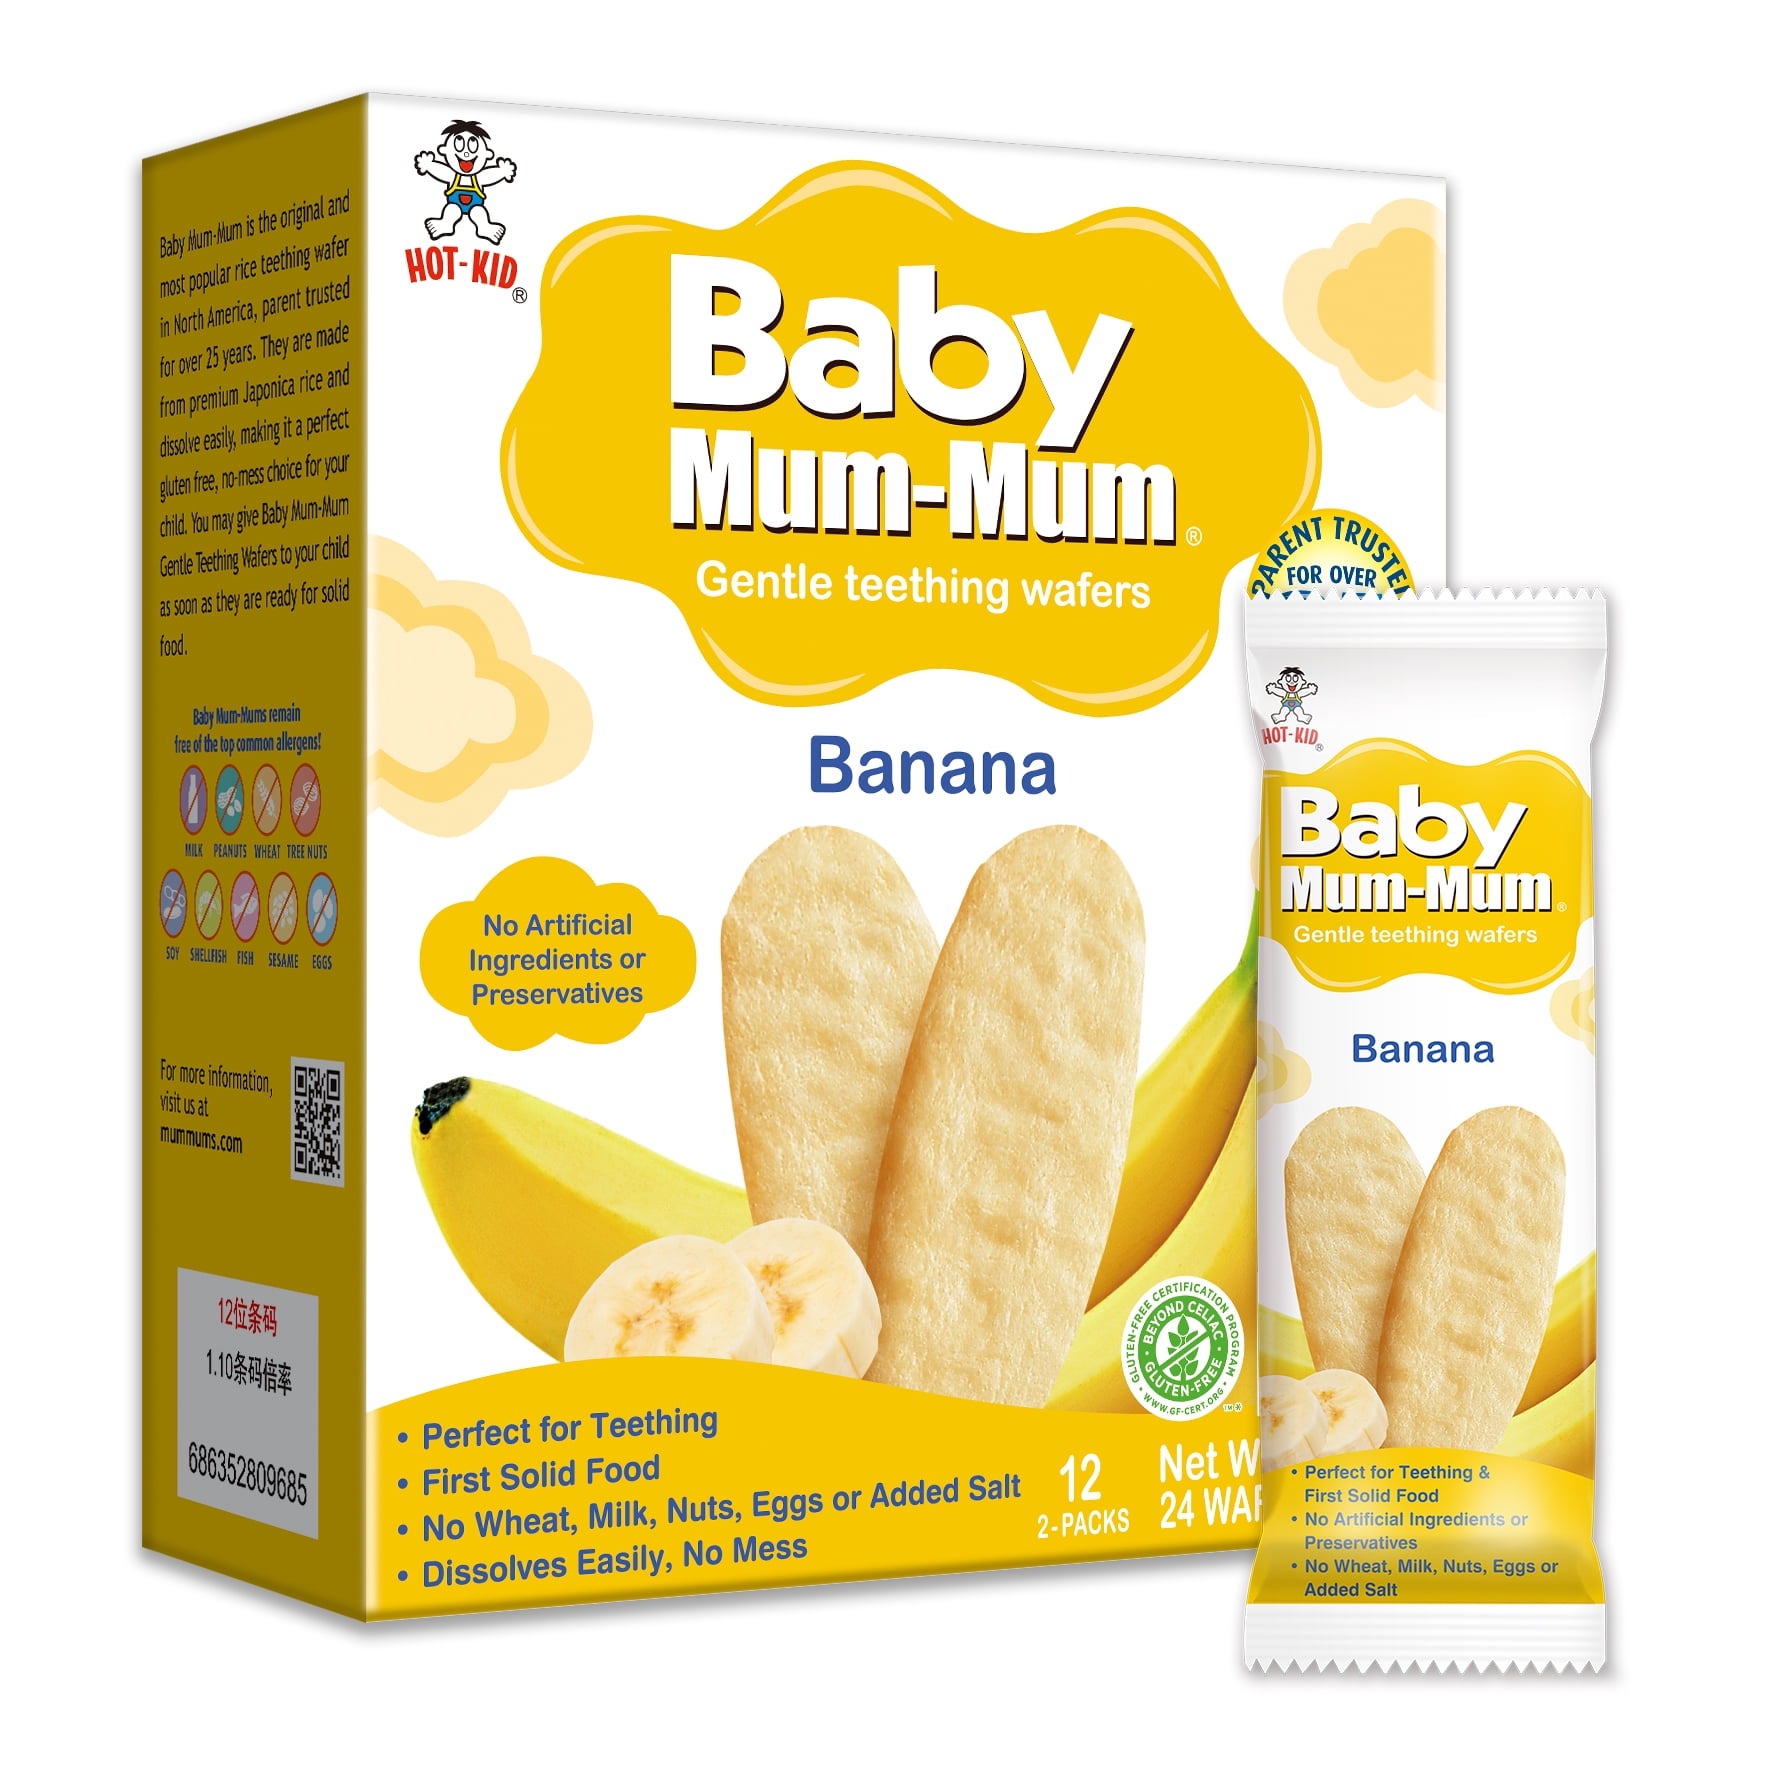 Baby Mum-Mum Rice Rusks, Banana, Gluten Free, Allergen Free, Non-GMO, Rice Teether Cookie for Teething Infants, 1.76 Ounce, 24 Pack